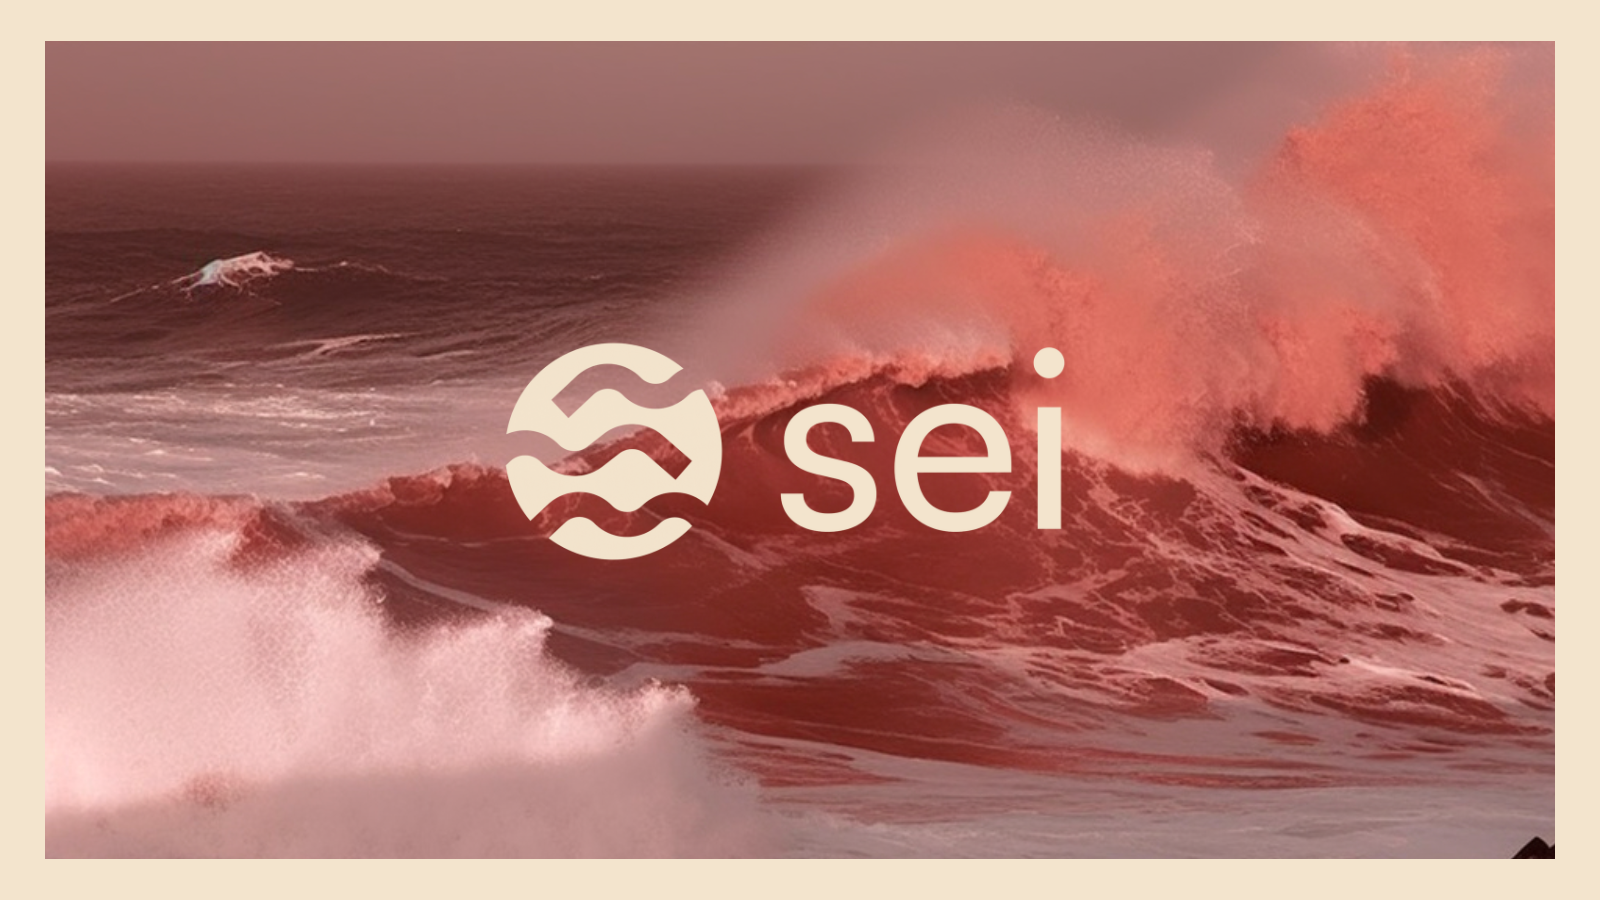 Foresight Ventures Brings Sei Ecosystem Fund to $120 Million Catalyzing Web3 Growth and Innovation